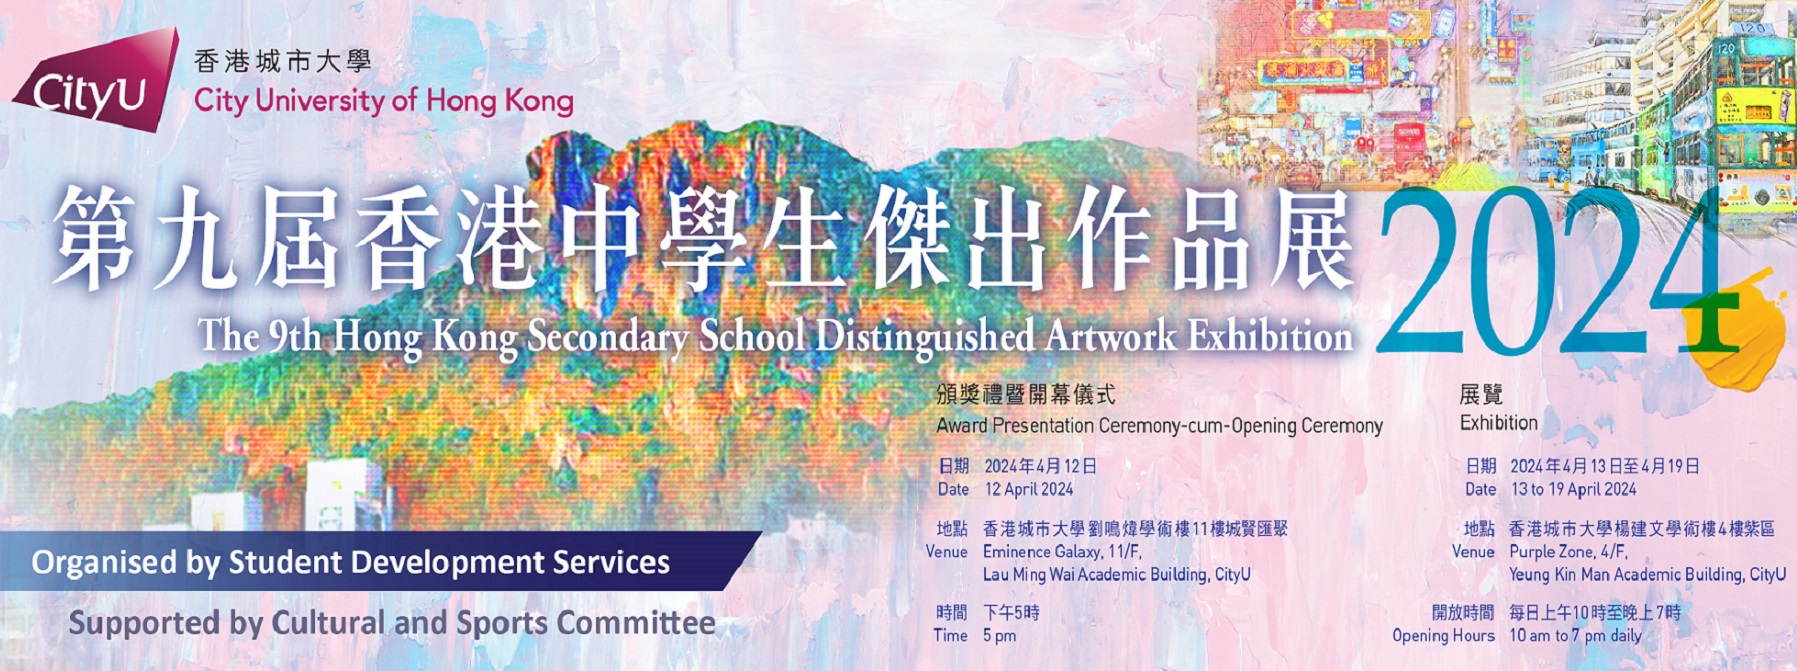 The 9th Hong Kong Secondary School Distinguished Artwork Exhibition 2024